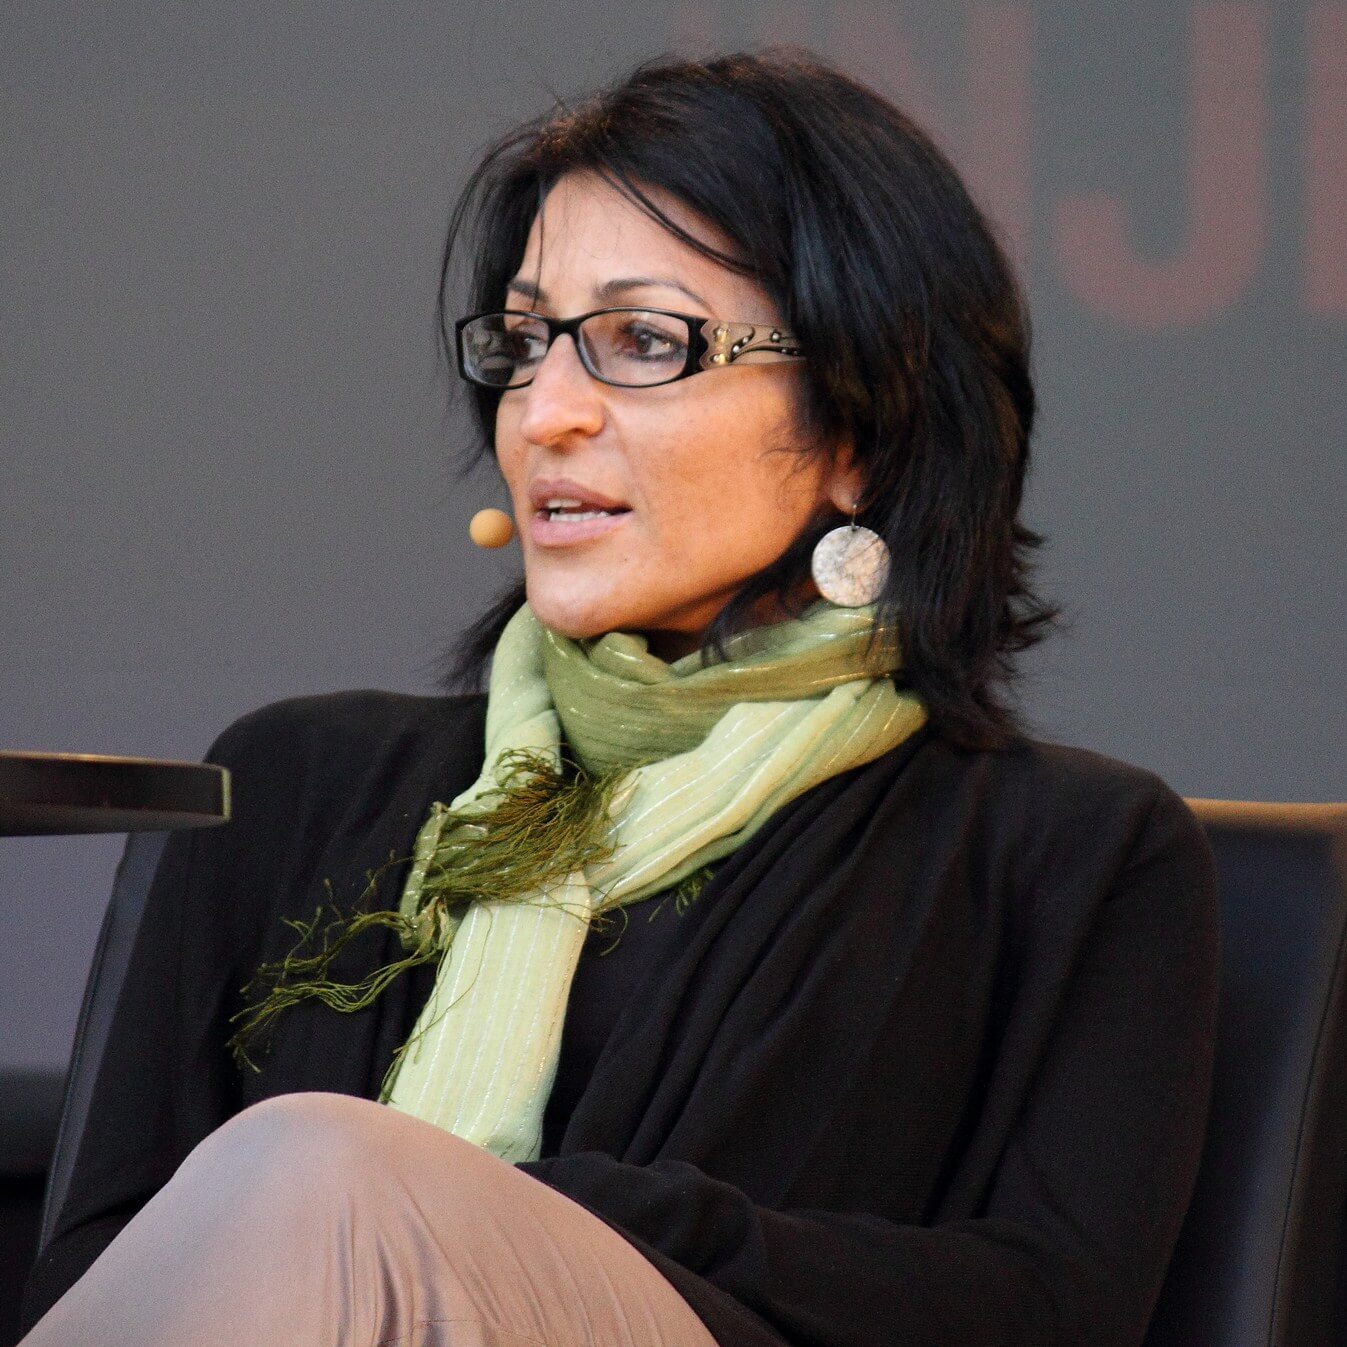 Author Susan Abulhawa takes a new approach to Palestinian storytelling.